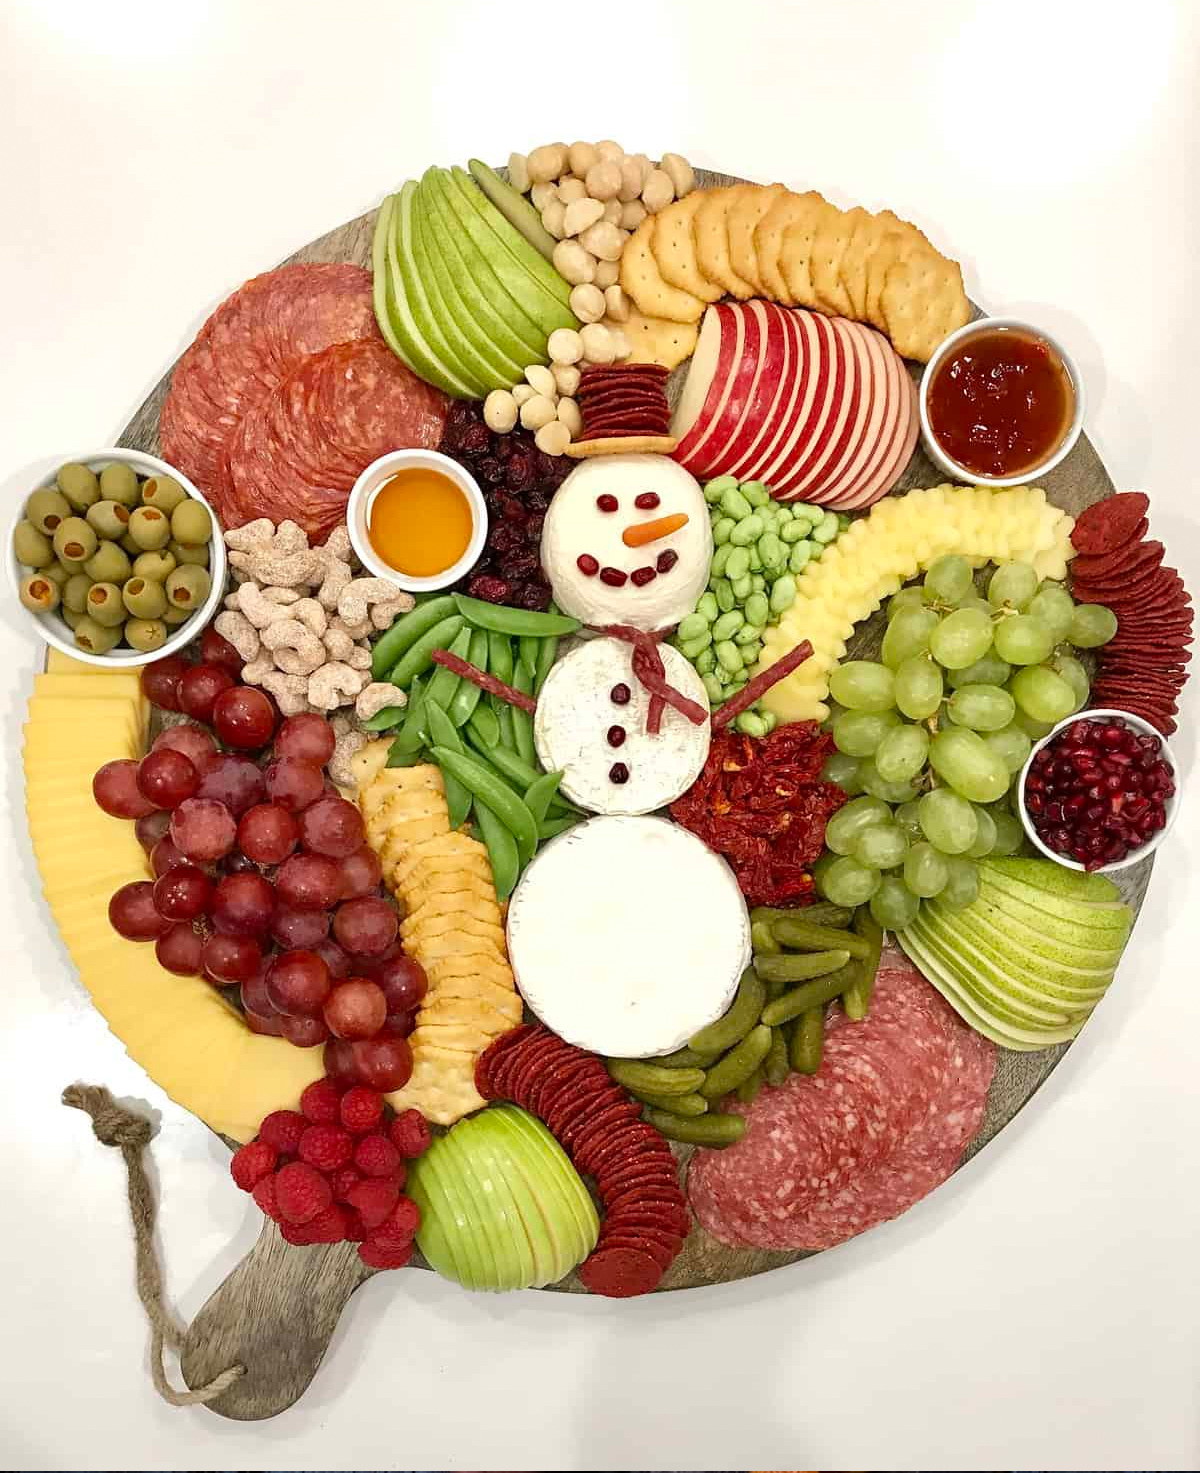 The BakerMama's Snowman snack board is filled with pears, apples, cheese, meat, olives, crackers, and nuts.